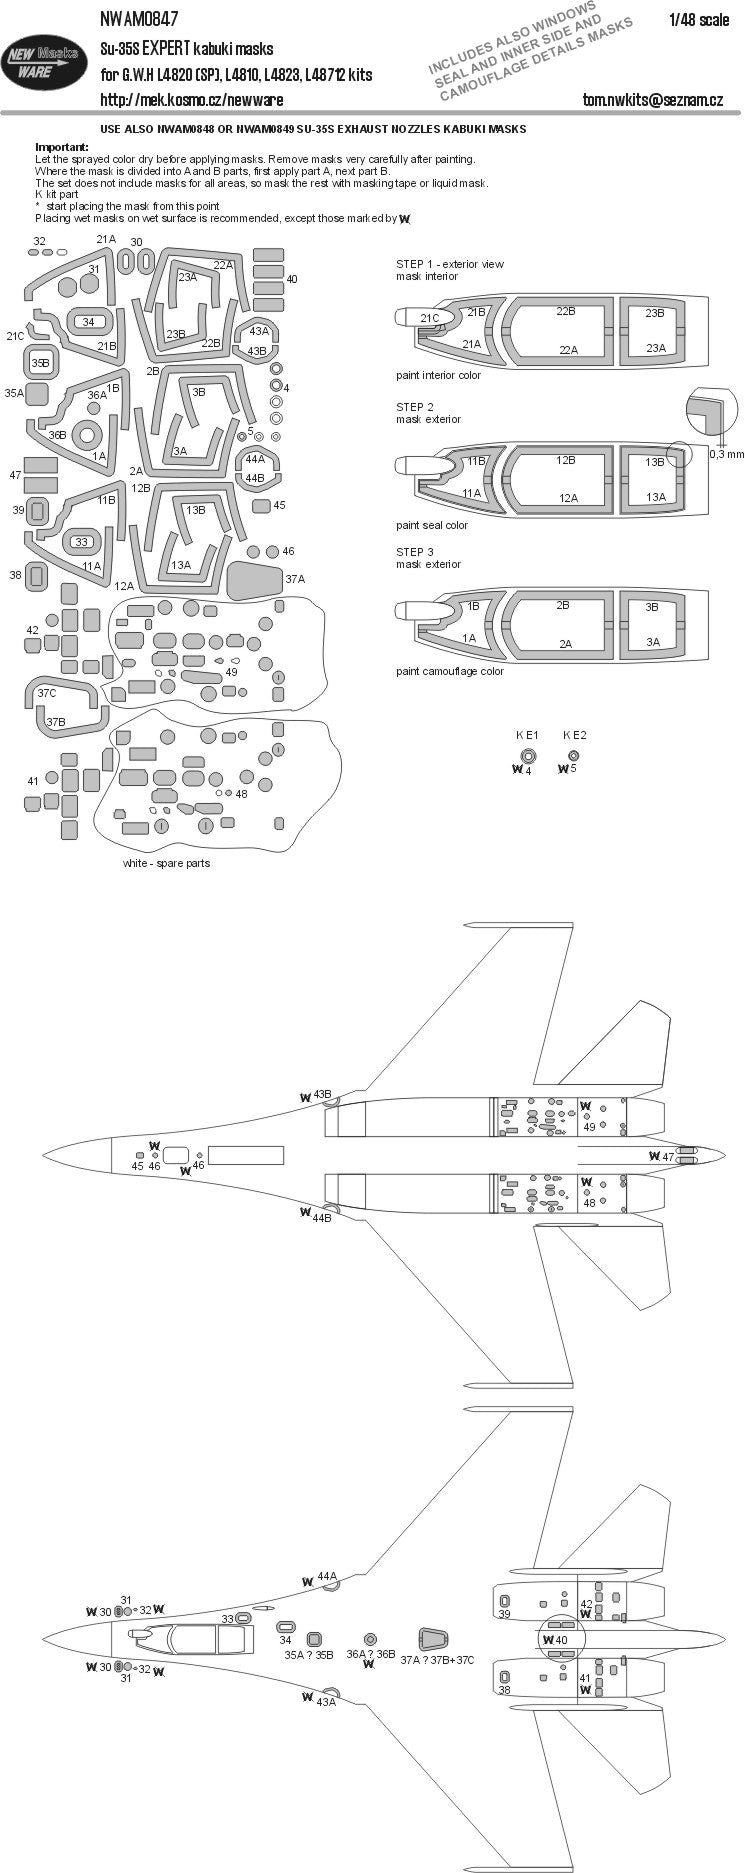 New Ware 0847 - Masking set for G.W.H 1/48 Su-35S EXPERT